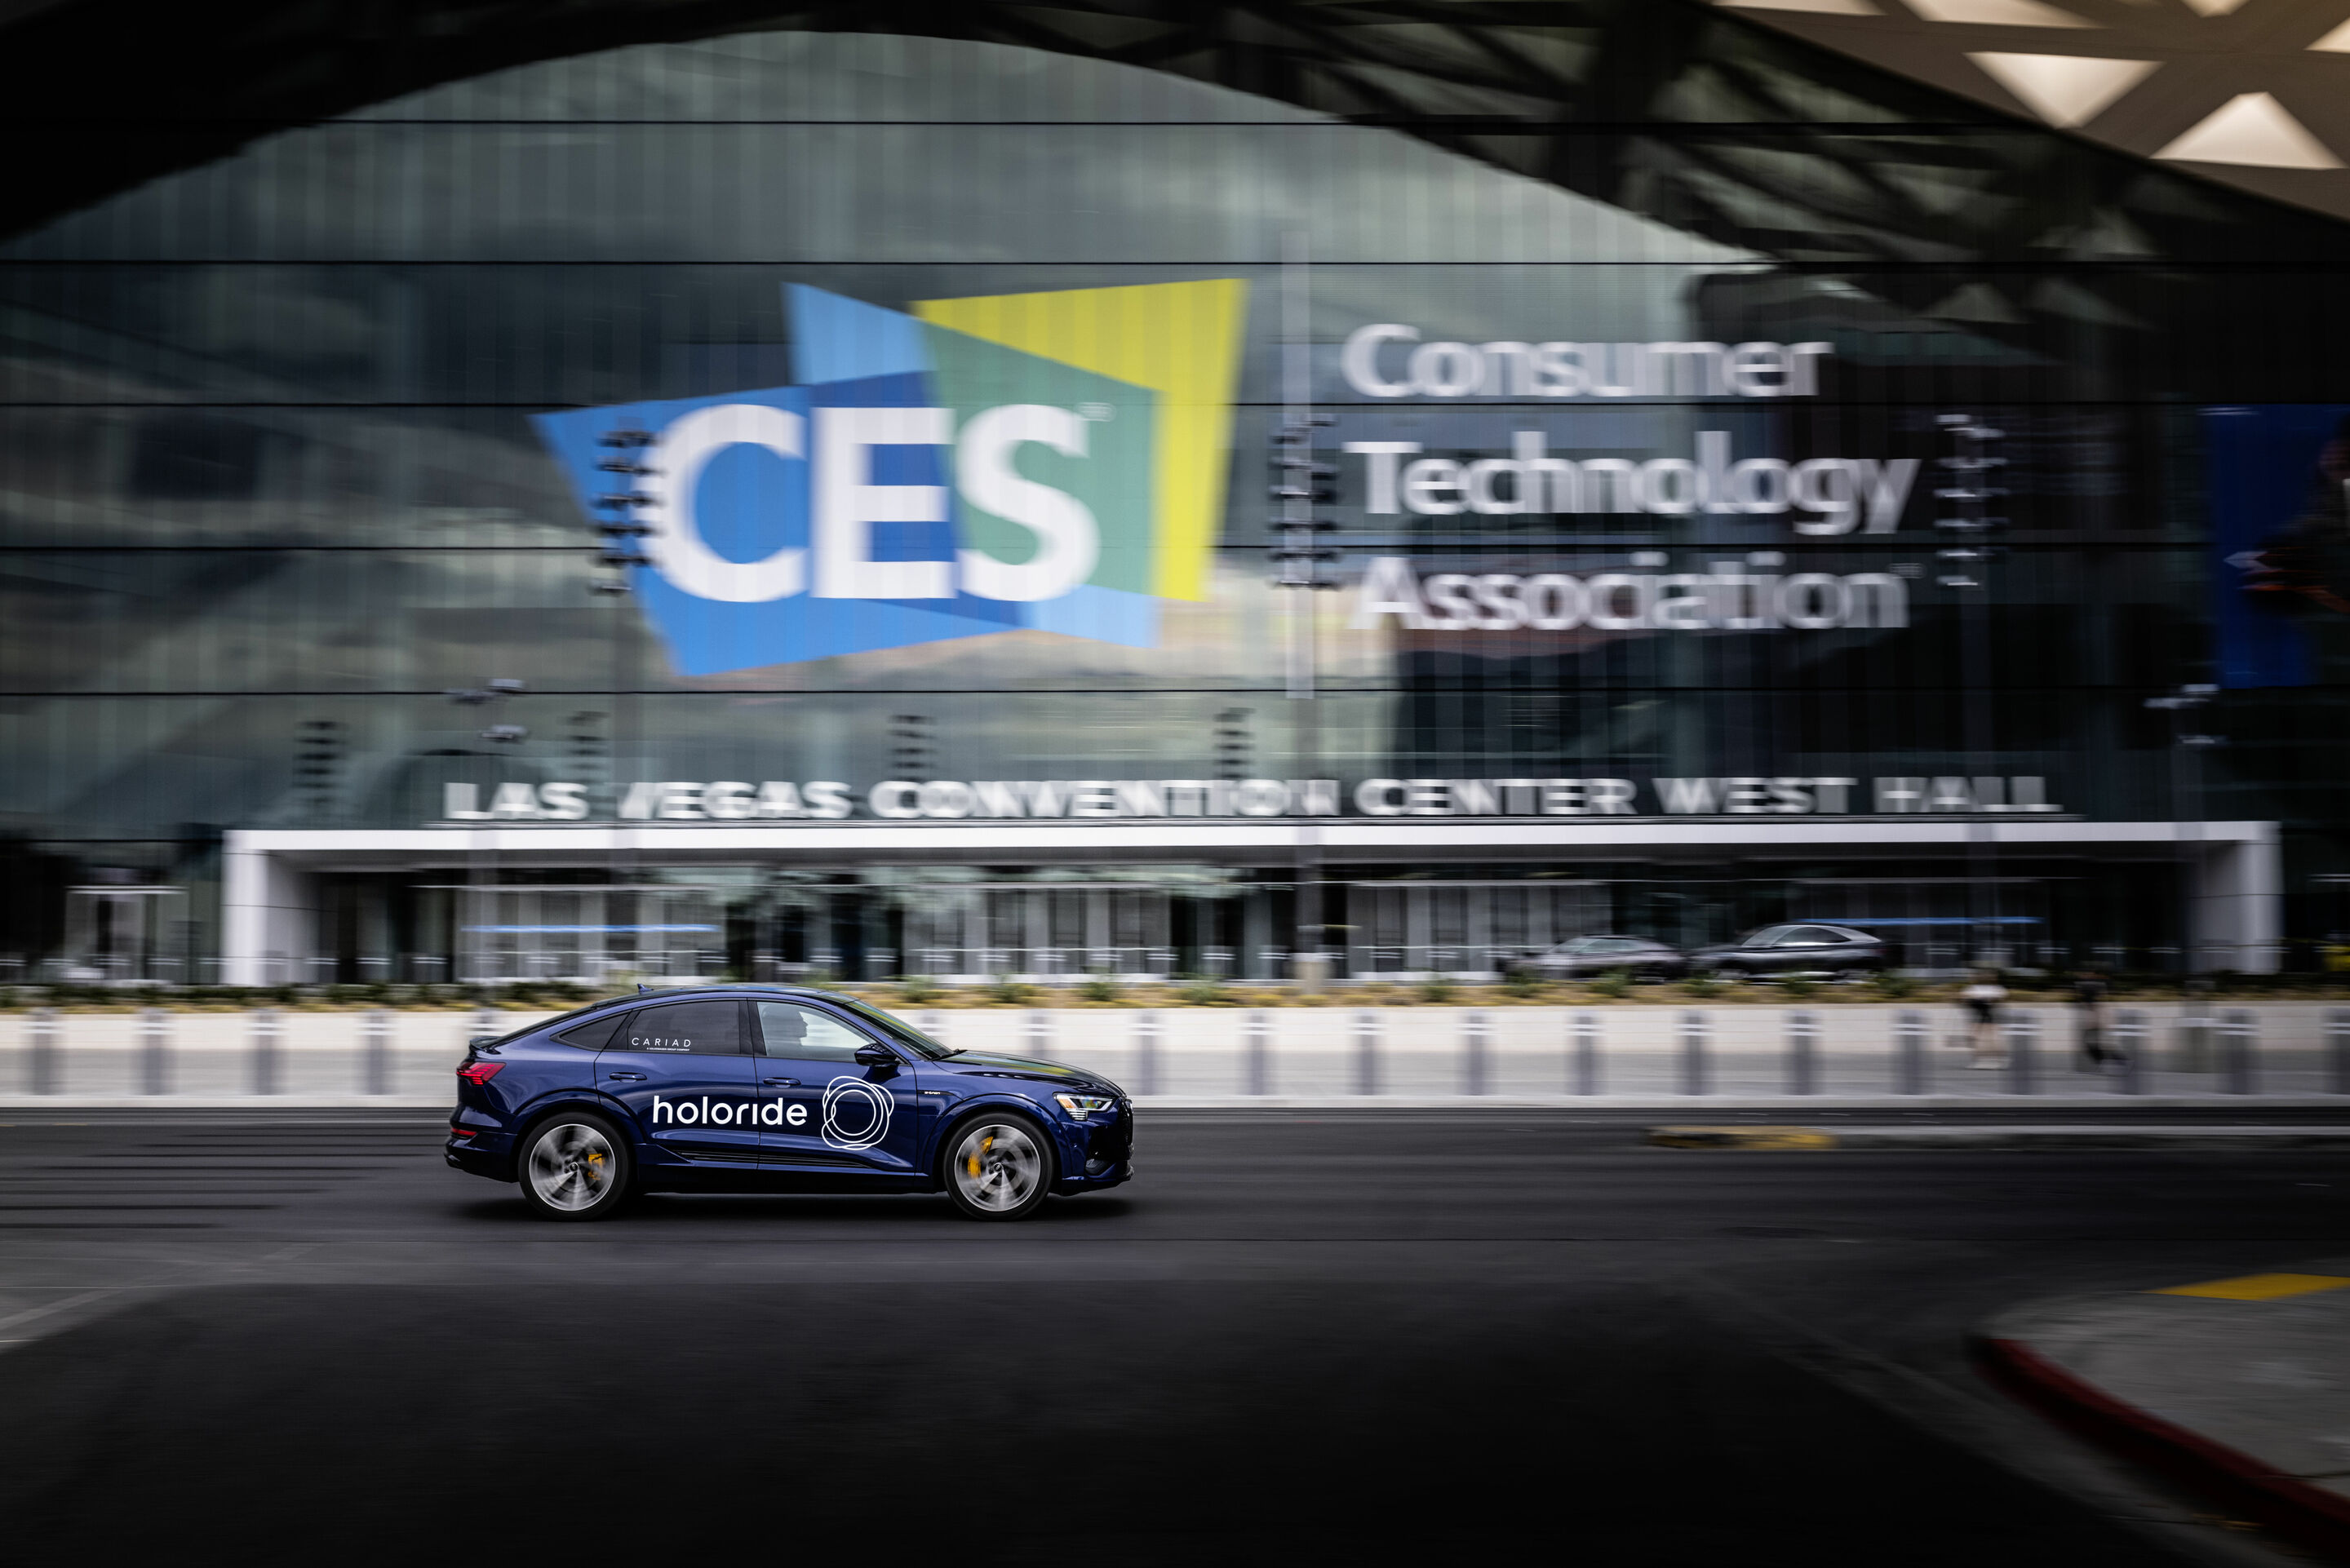 Audi at CES 2023: Test drives with holoride